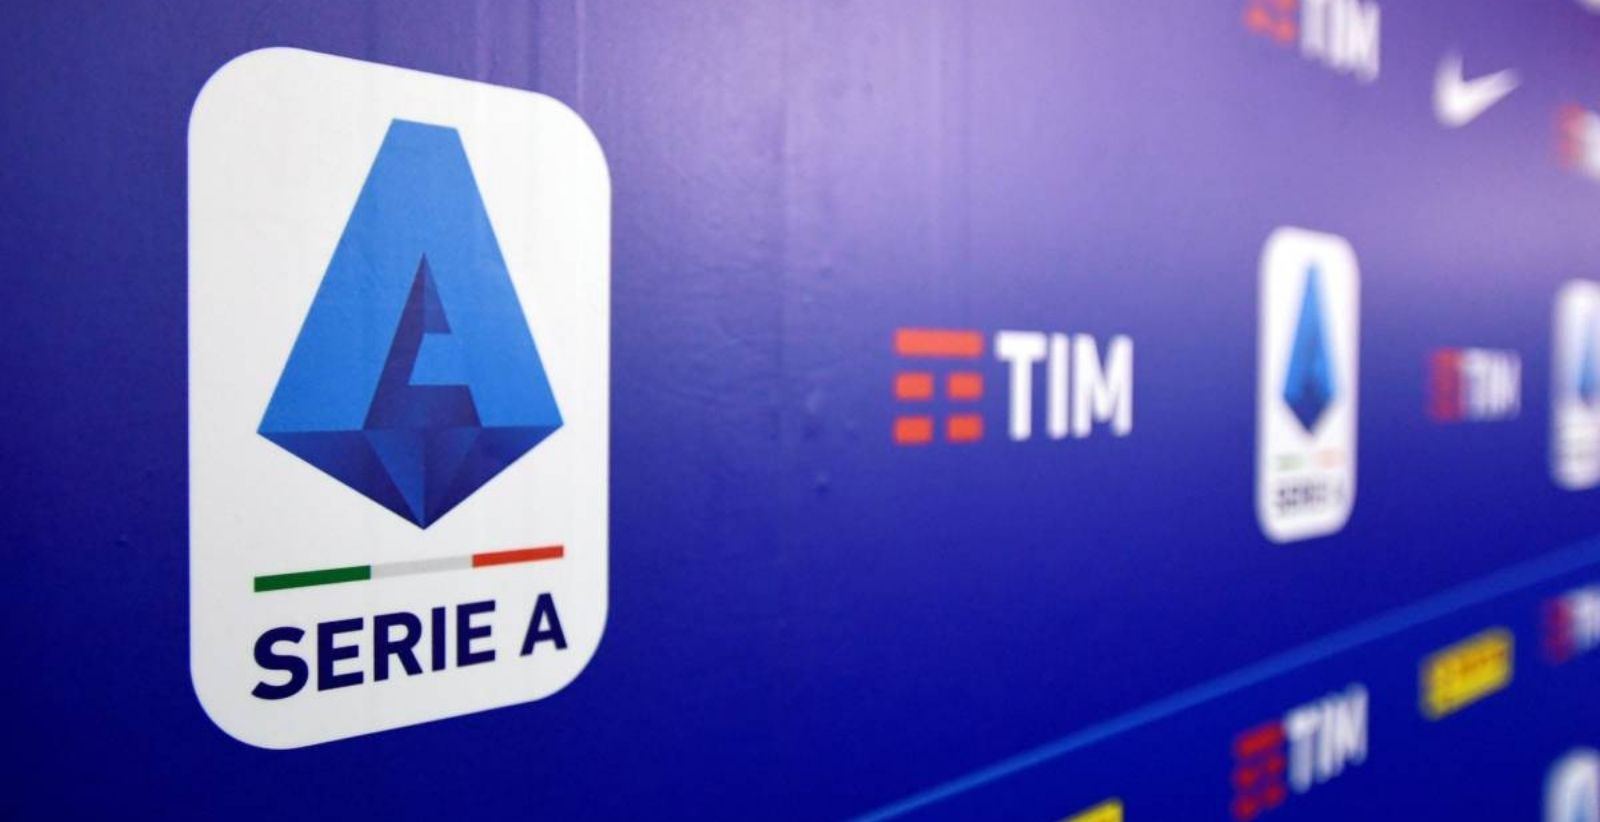 PPLive Announces Suspension of Serie A Rights Deal as China’s Major Sports Media Platforms Undergo Business Overhaul